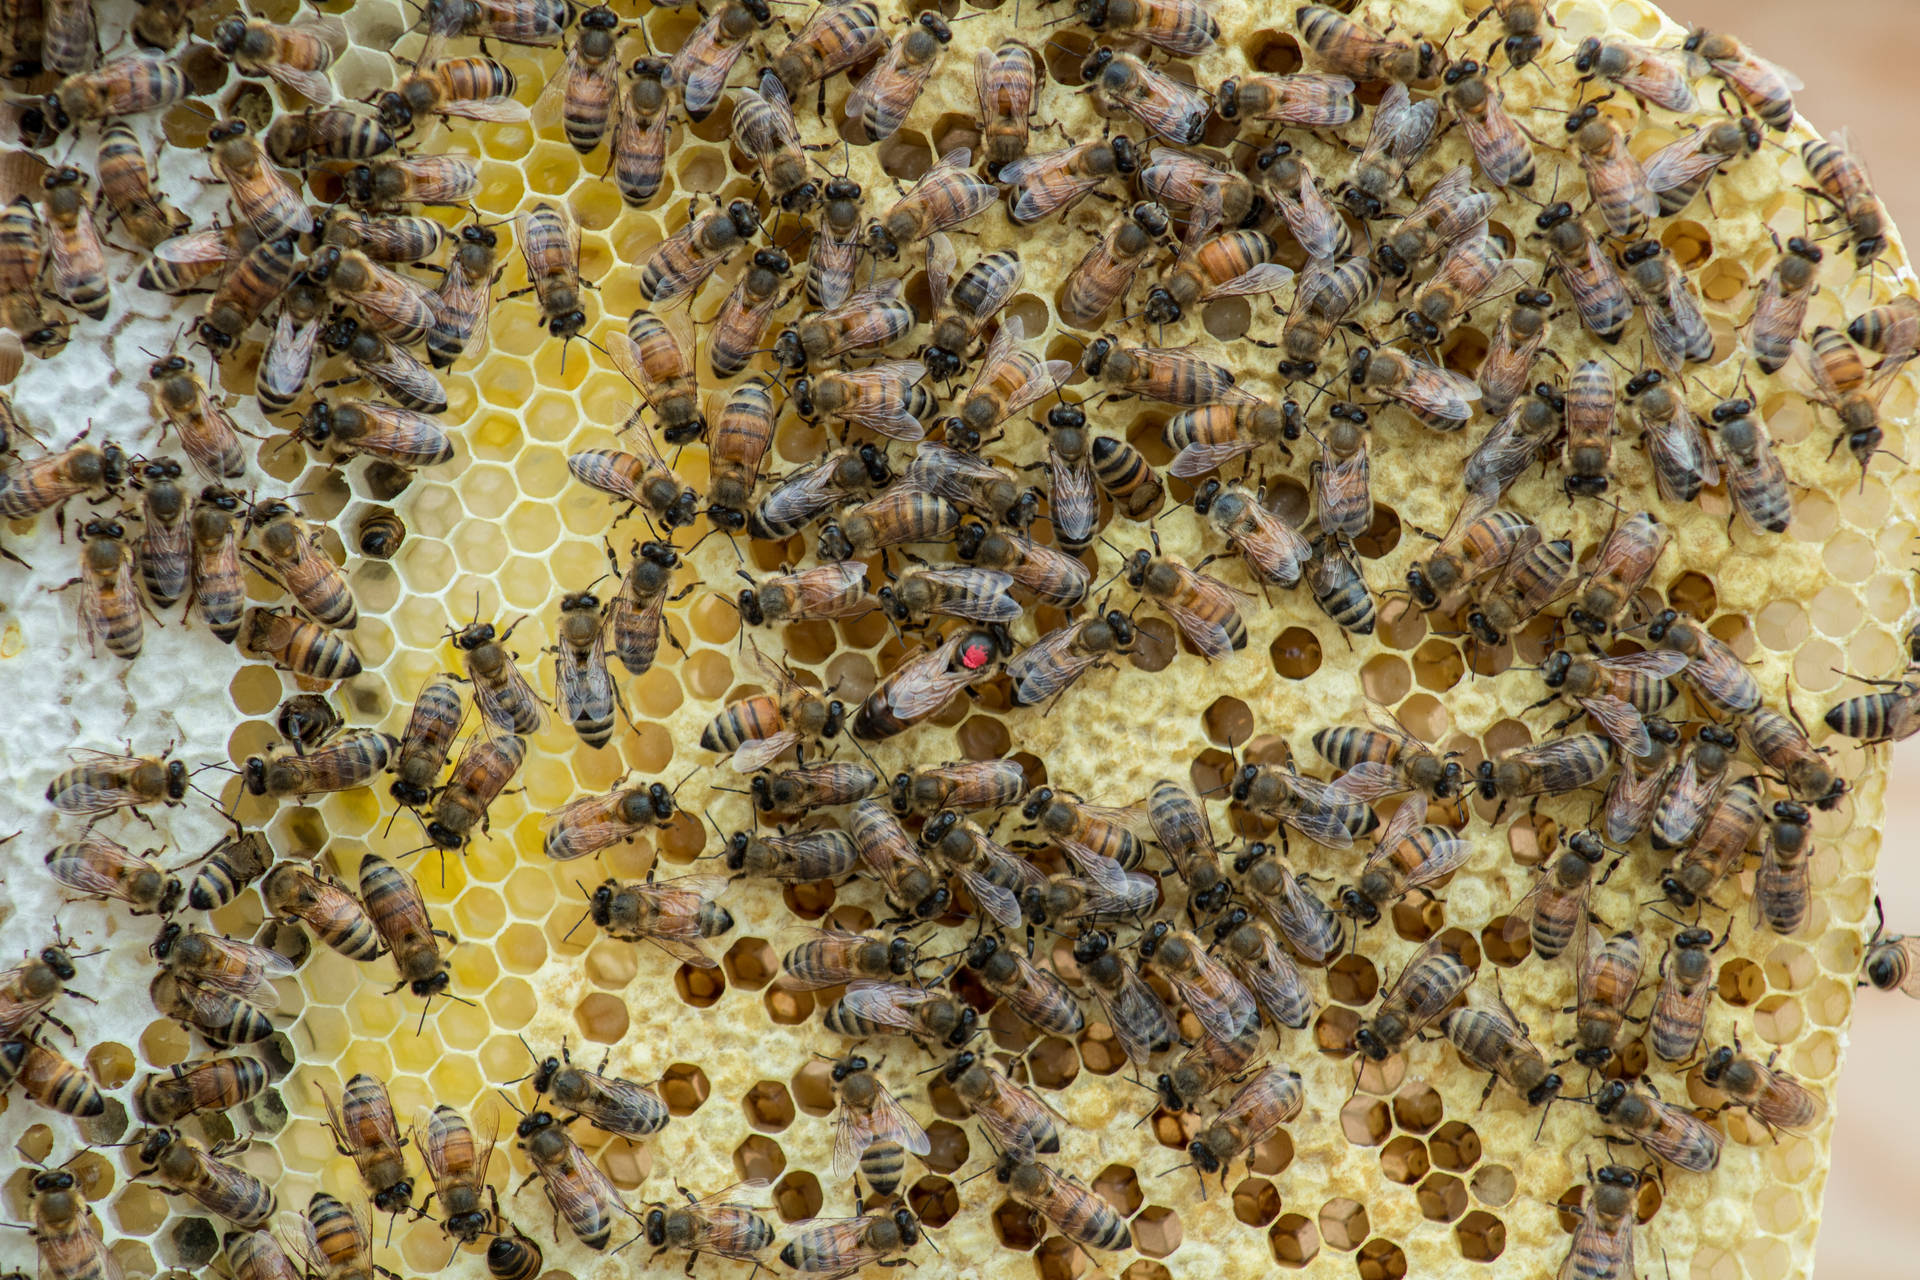 Honeycomb Full Of Bees